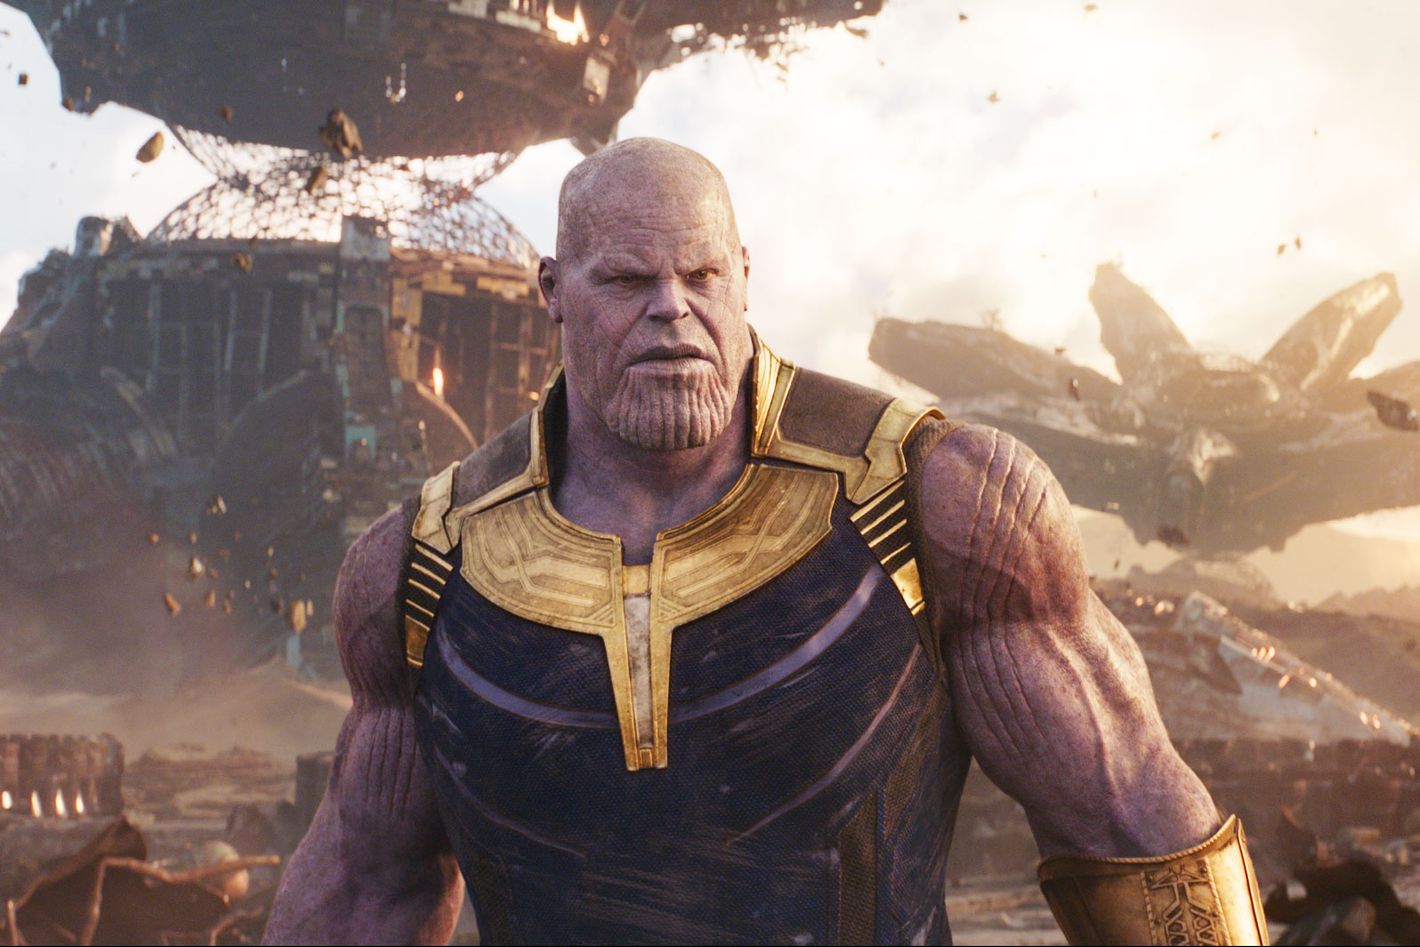 Incredible Compilation Of Thanos Images In Full 4k Resolution Over 999 Stunning Pictures